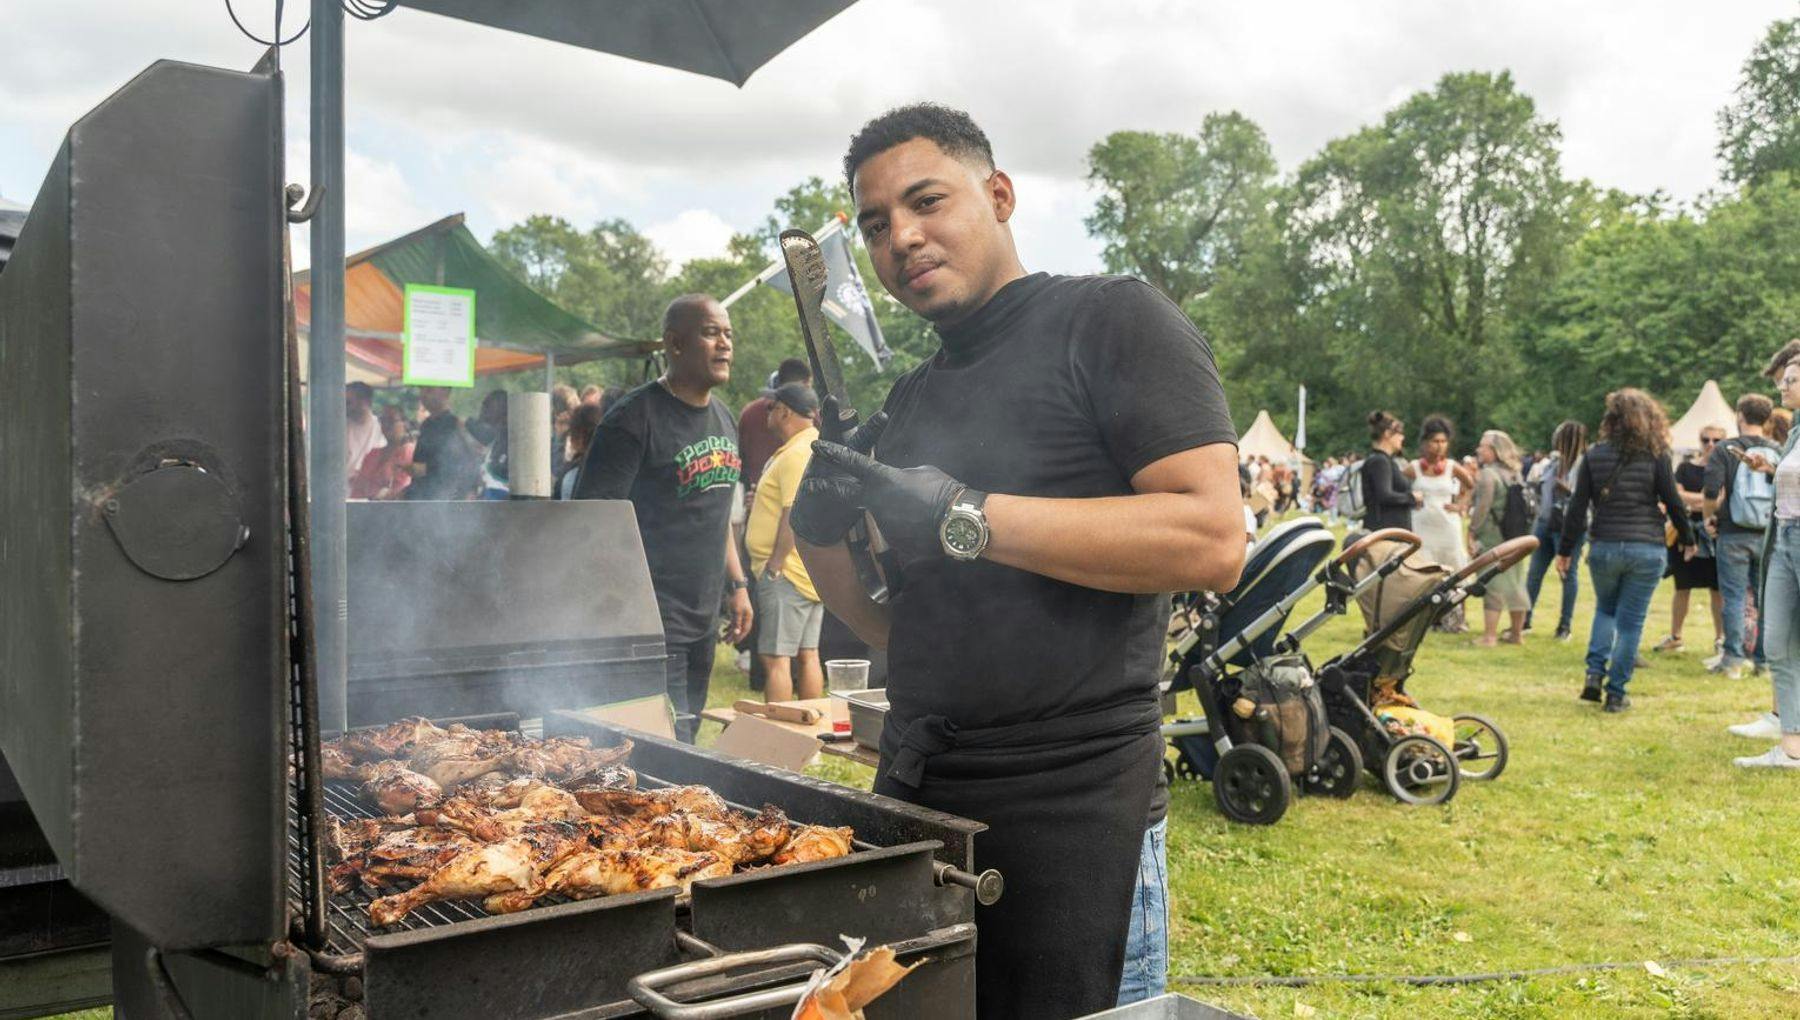 A man grilling chicken on the bbq during Keti Koti Festival 2022 in the Oosterpark.